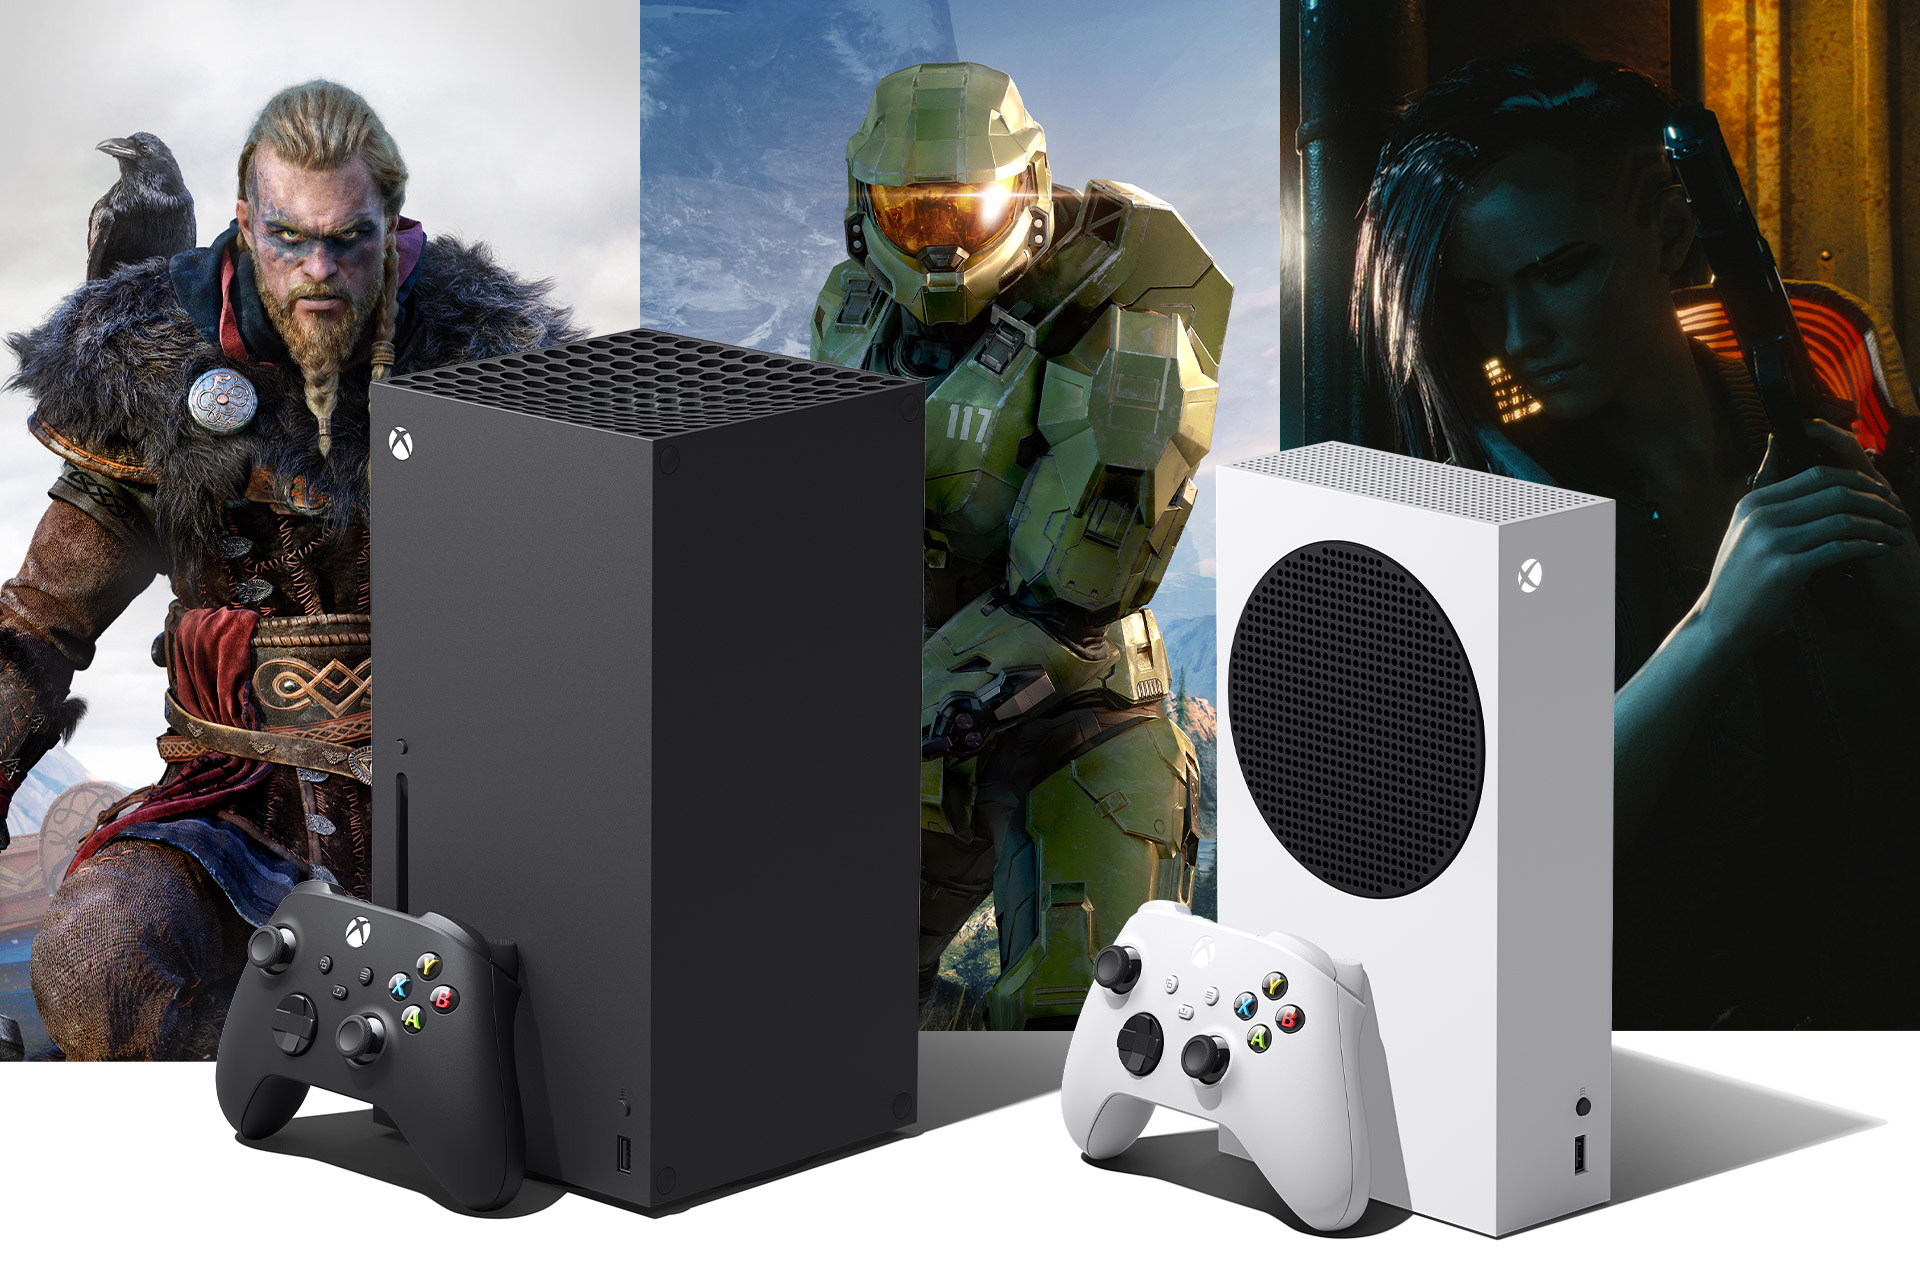 Xbox Series X and Xbox Series S with Assassins Creed Valhalla, Halo Infinite, and Cyberpunk 2077 game art